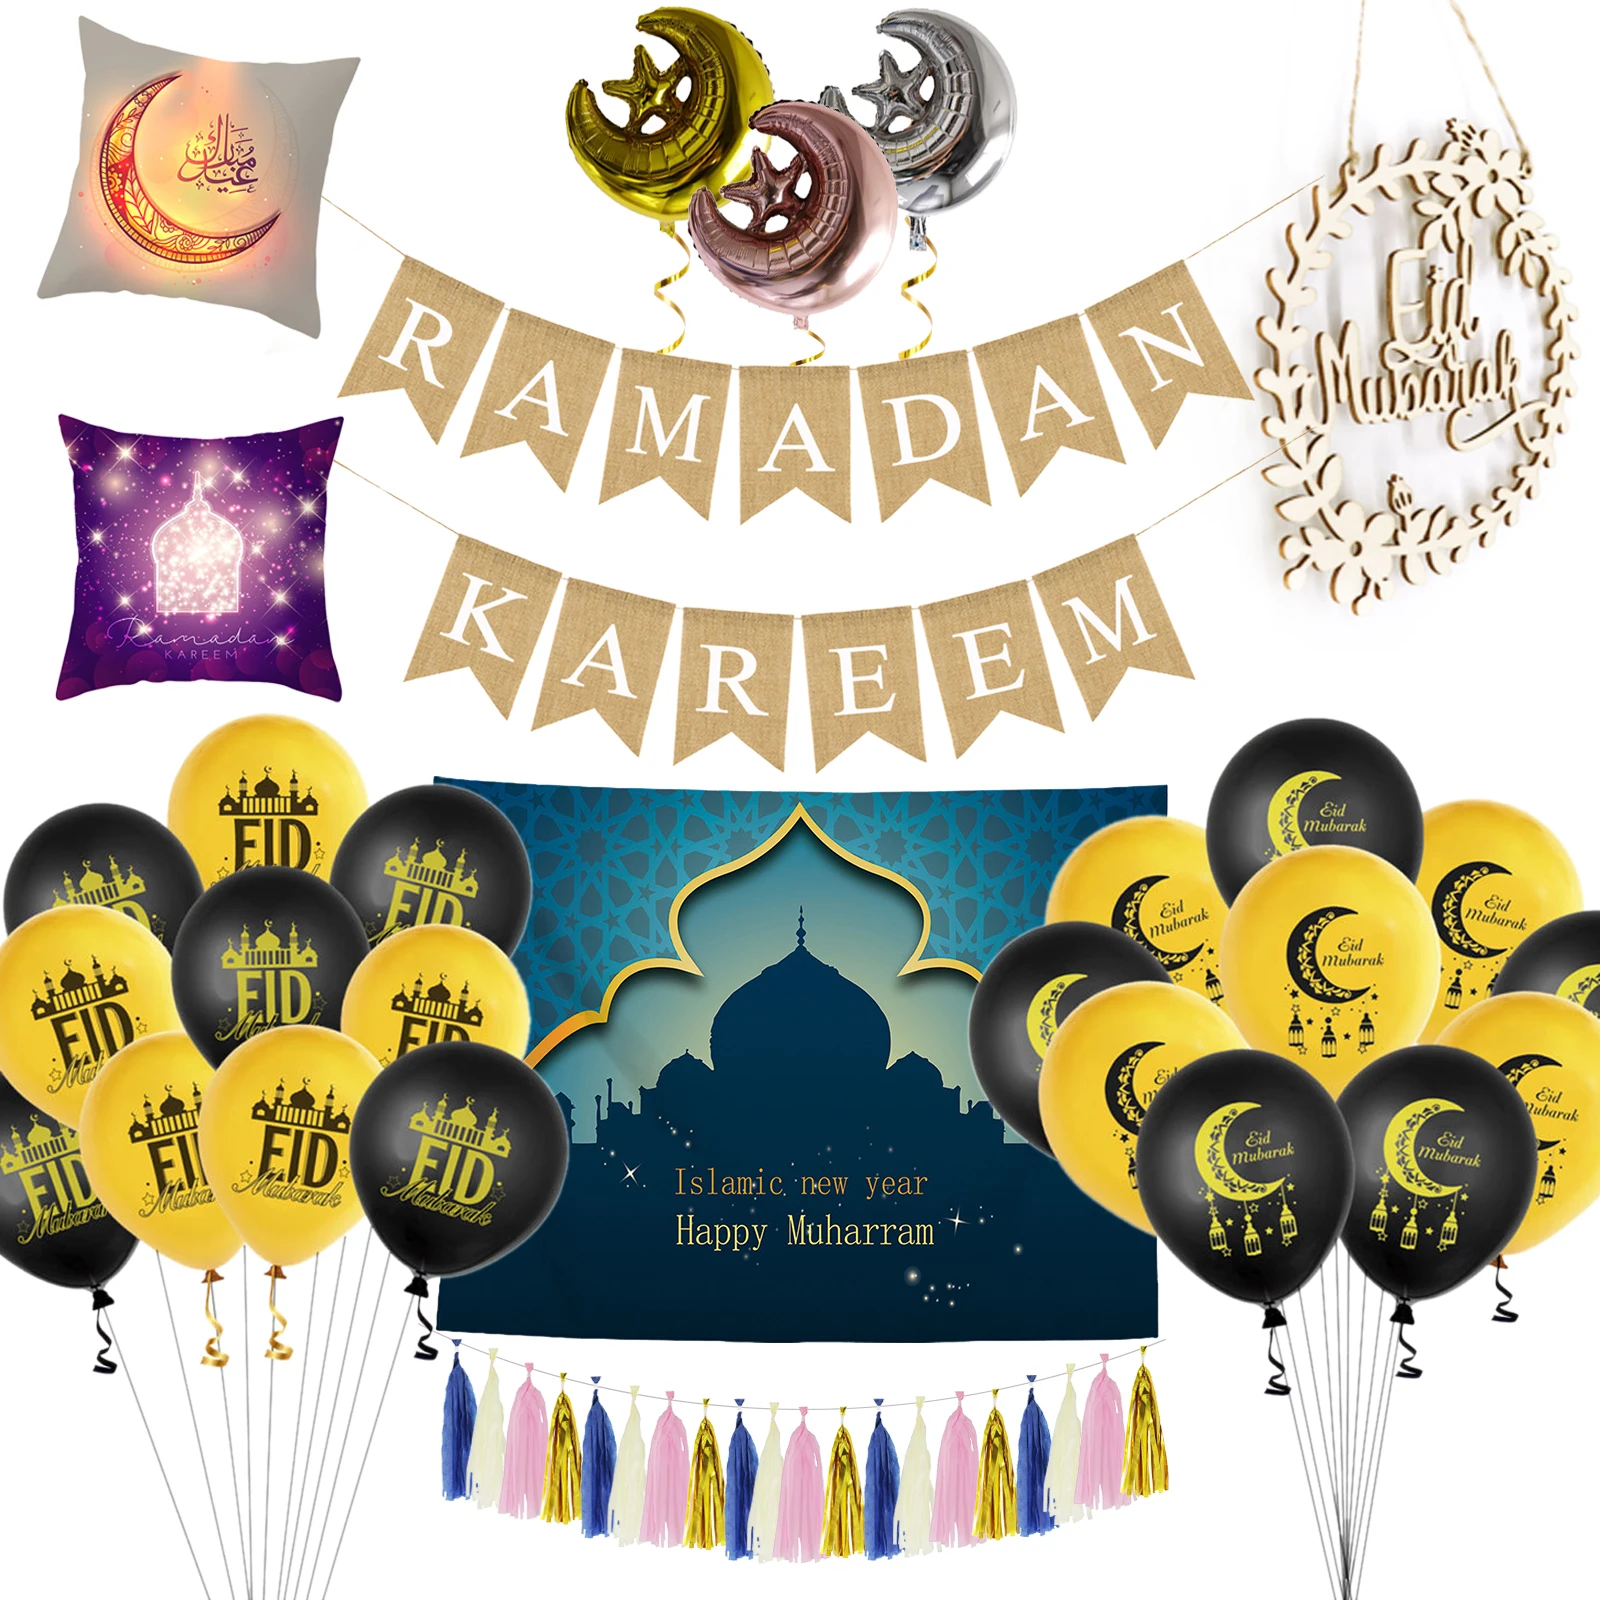 EID MUBARAK Party Decoration banners LOTS Islamic Ramadan Gifts ☪☪ FAST DELIVERY 